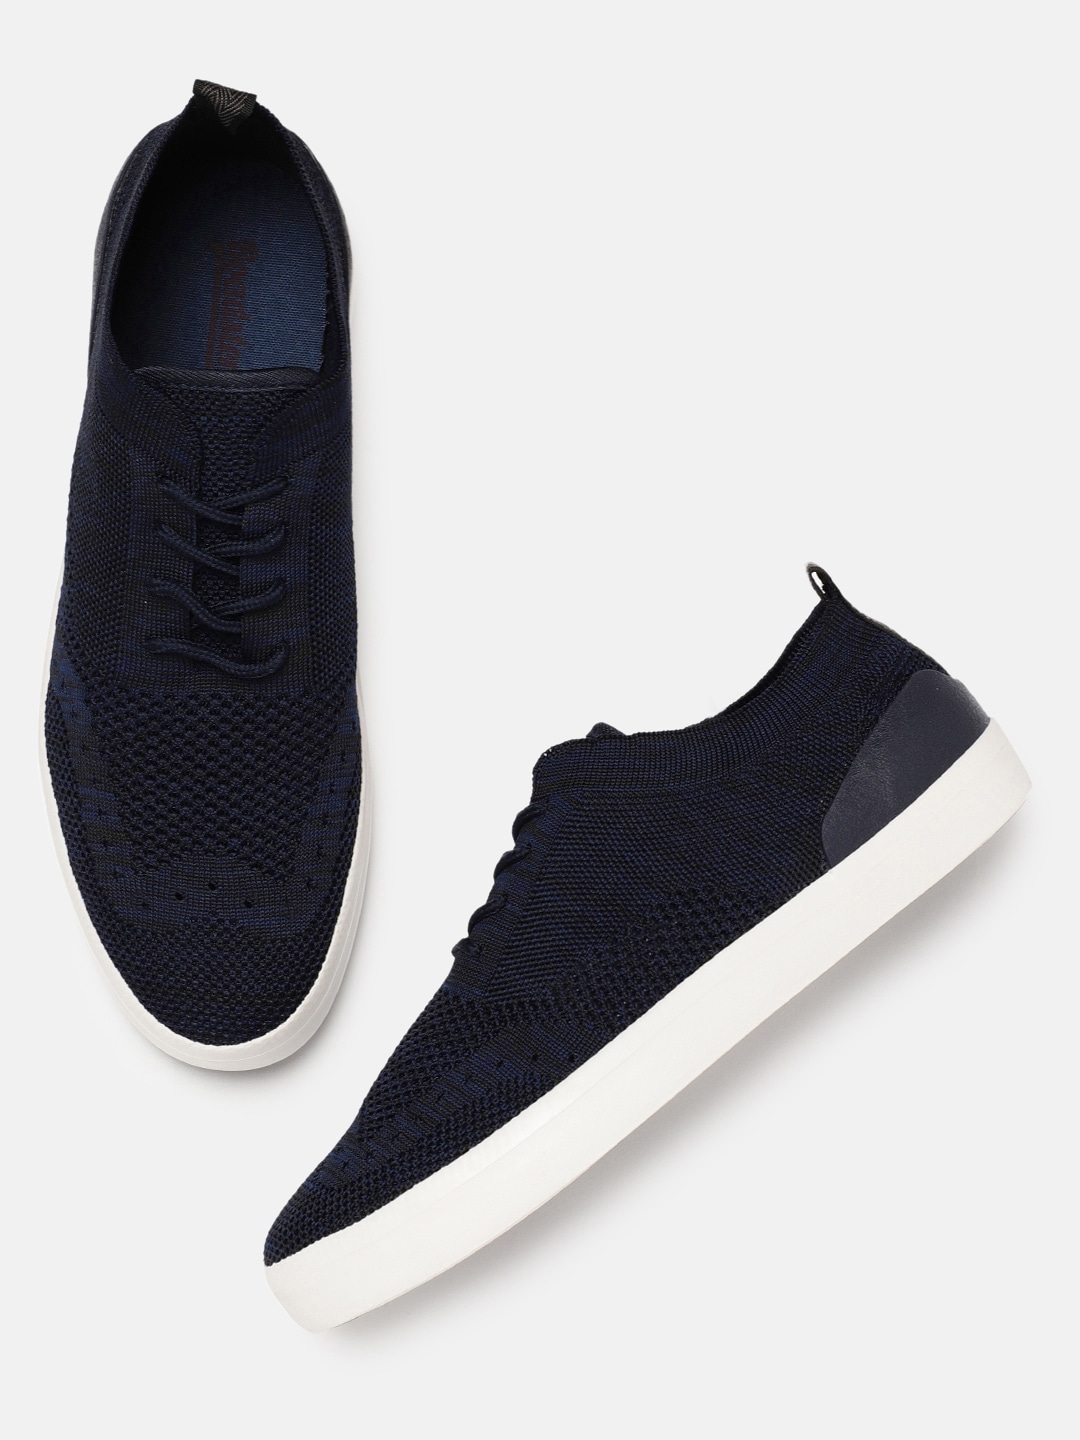 The Roadster Lifestyle Co. Men Navy Blue & White Colourblocked Lightweight  Sneakers - Price History